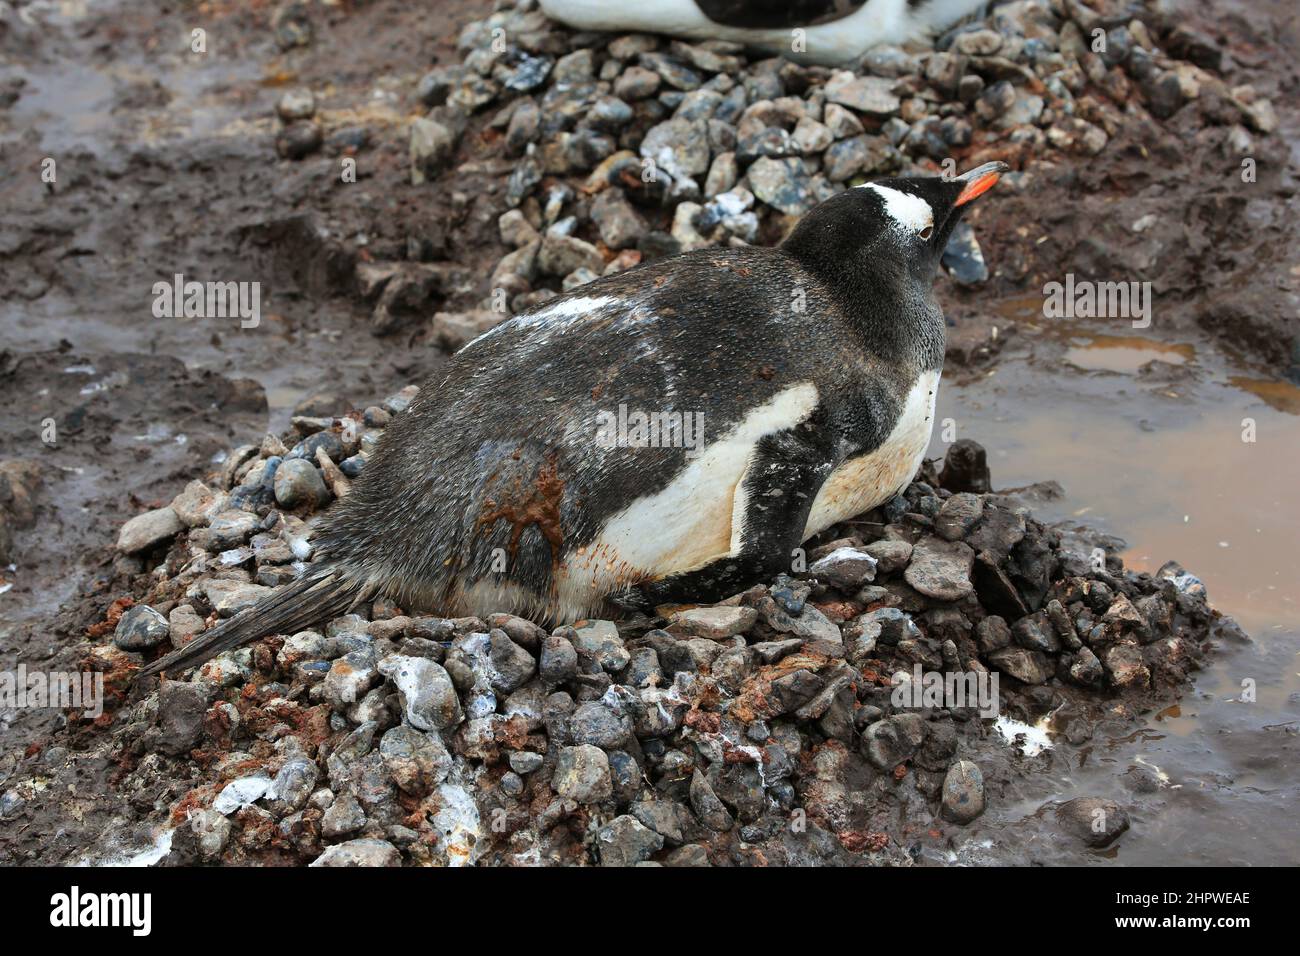 A Gentoo penguin has been hit with excrement while sitting on its nest  at the González Videla Station (Chilean Base) in Antarctica. Stock Photo